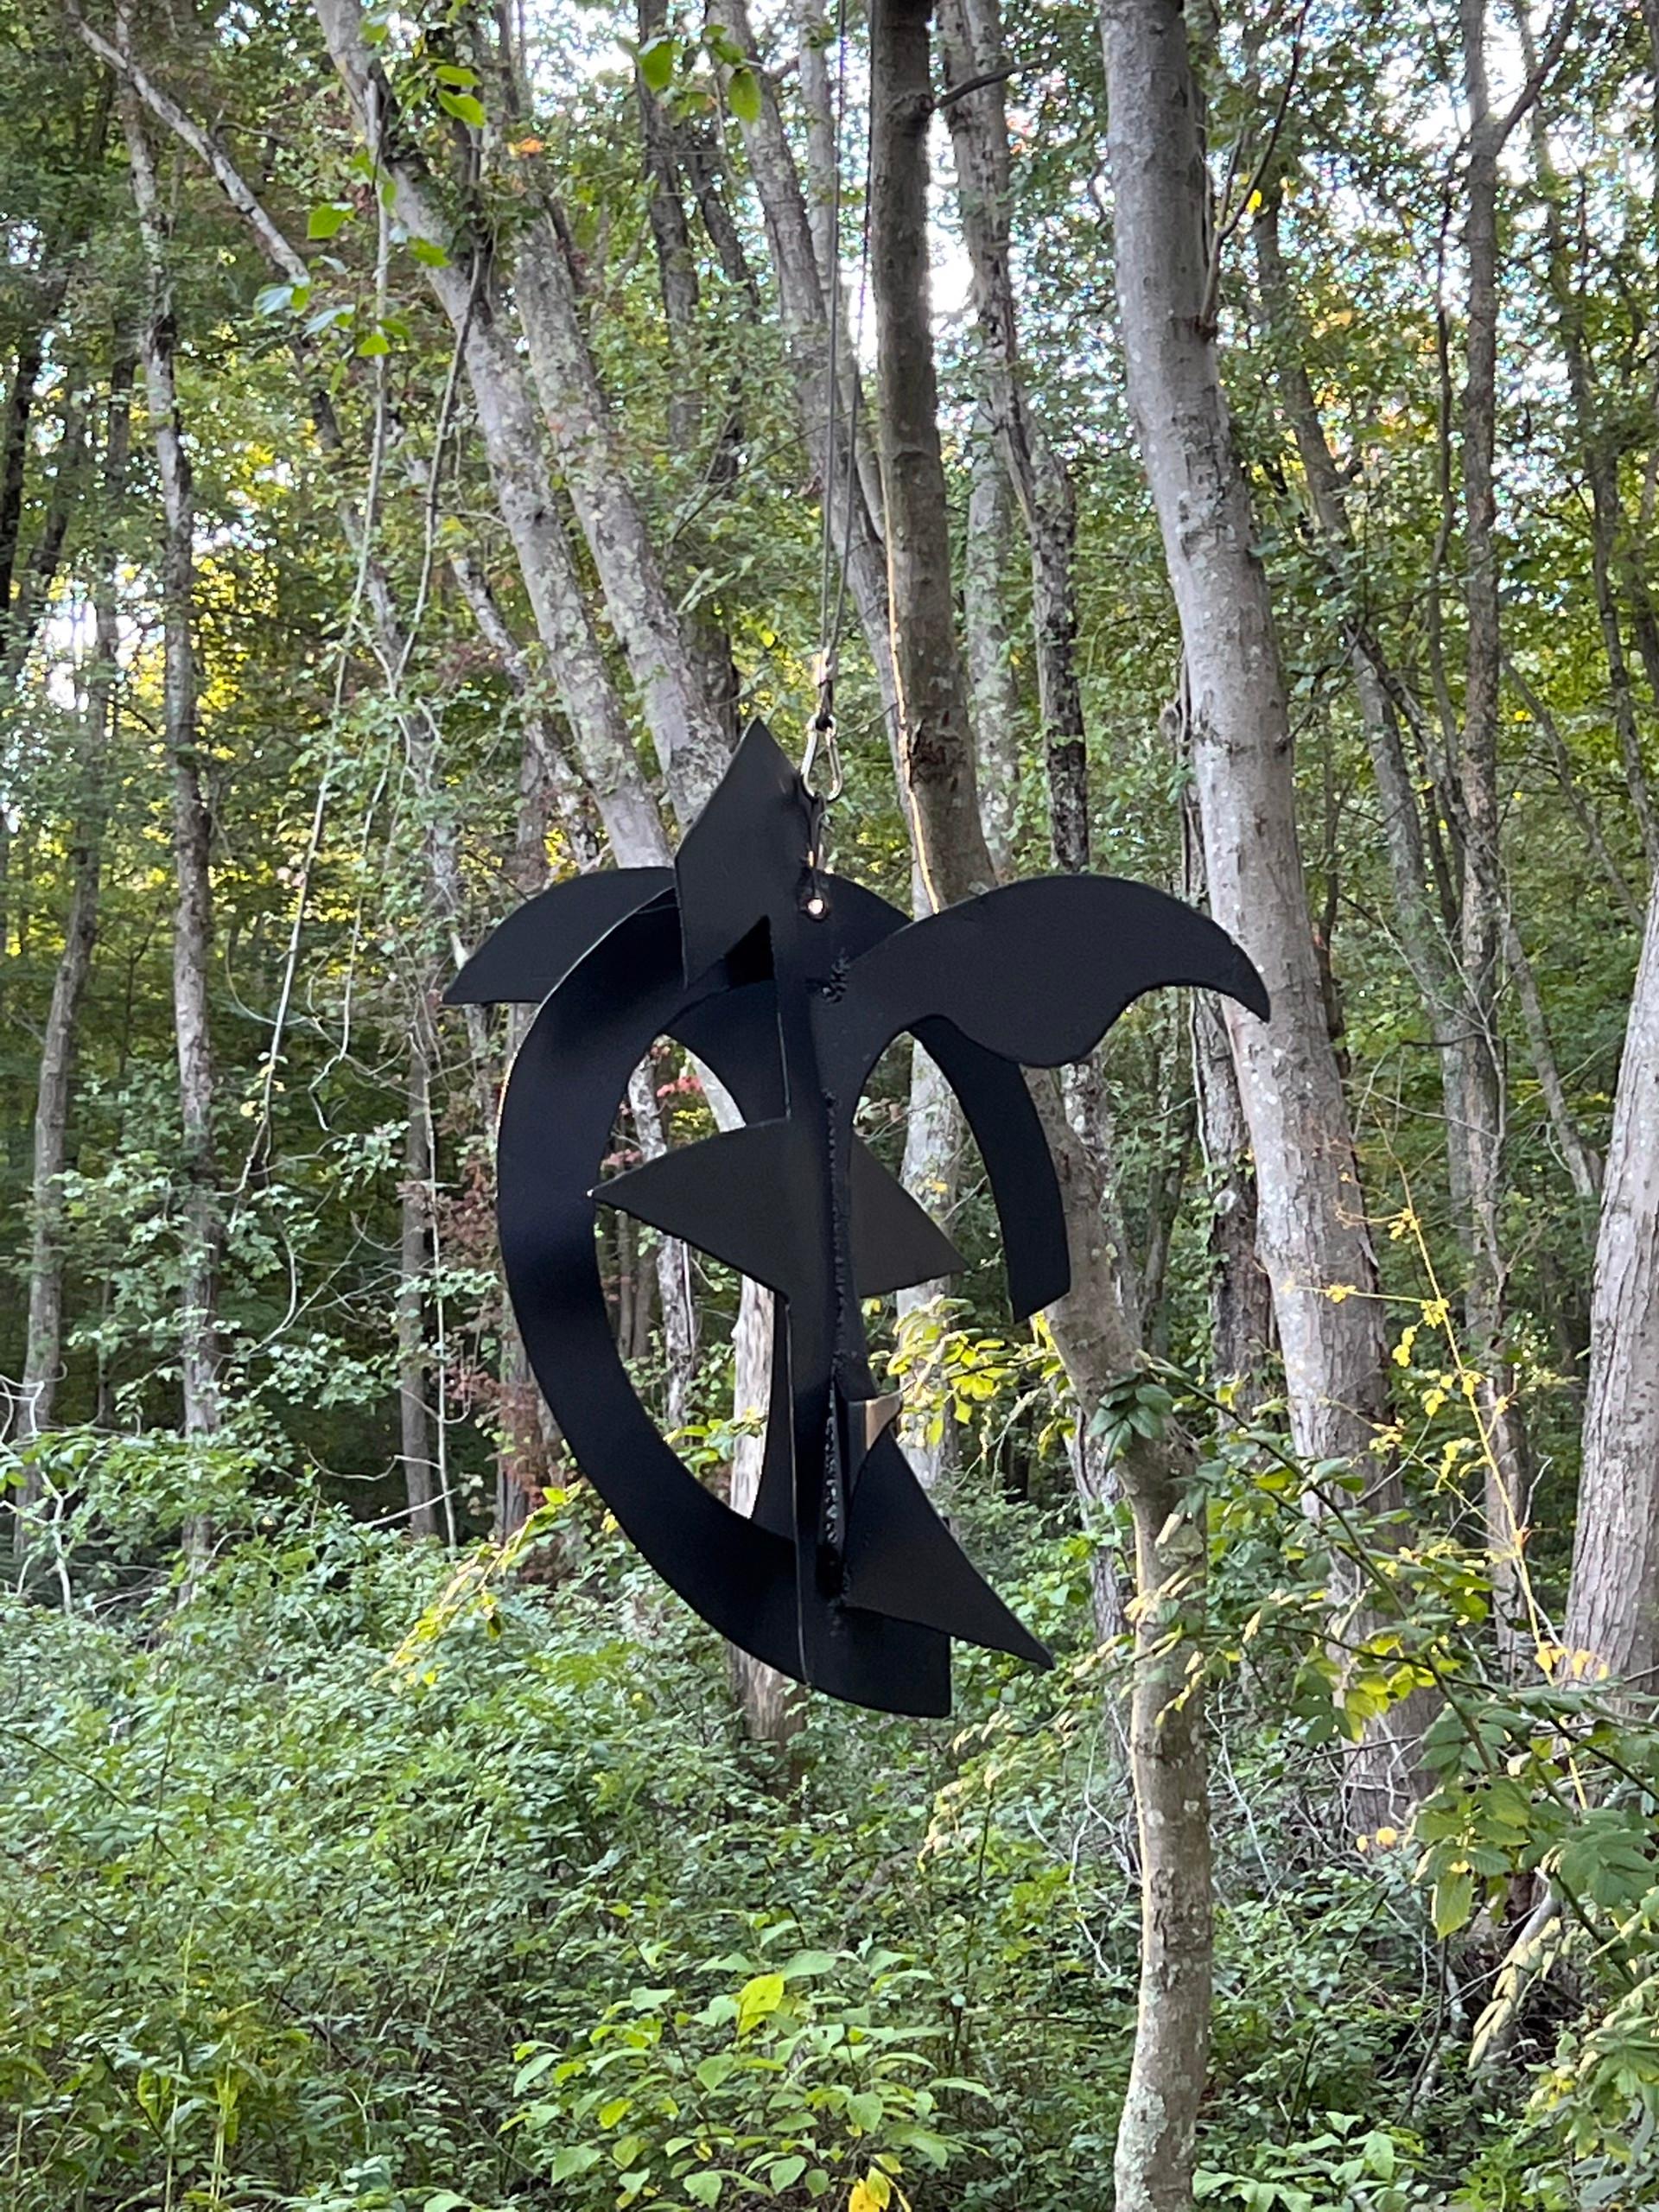 Hanging Sculpture #22
David Hayes (1931 - 2013)
Painted steel mobile
35 x 33 x 28 in